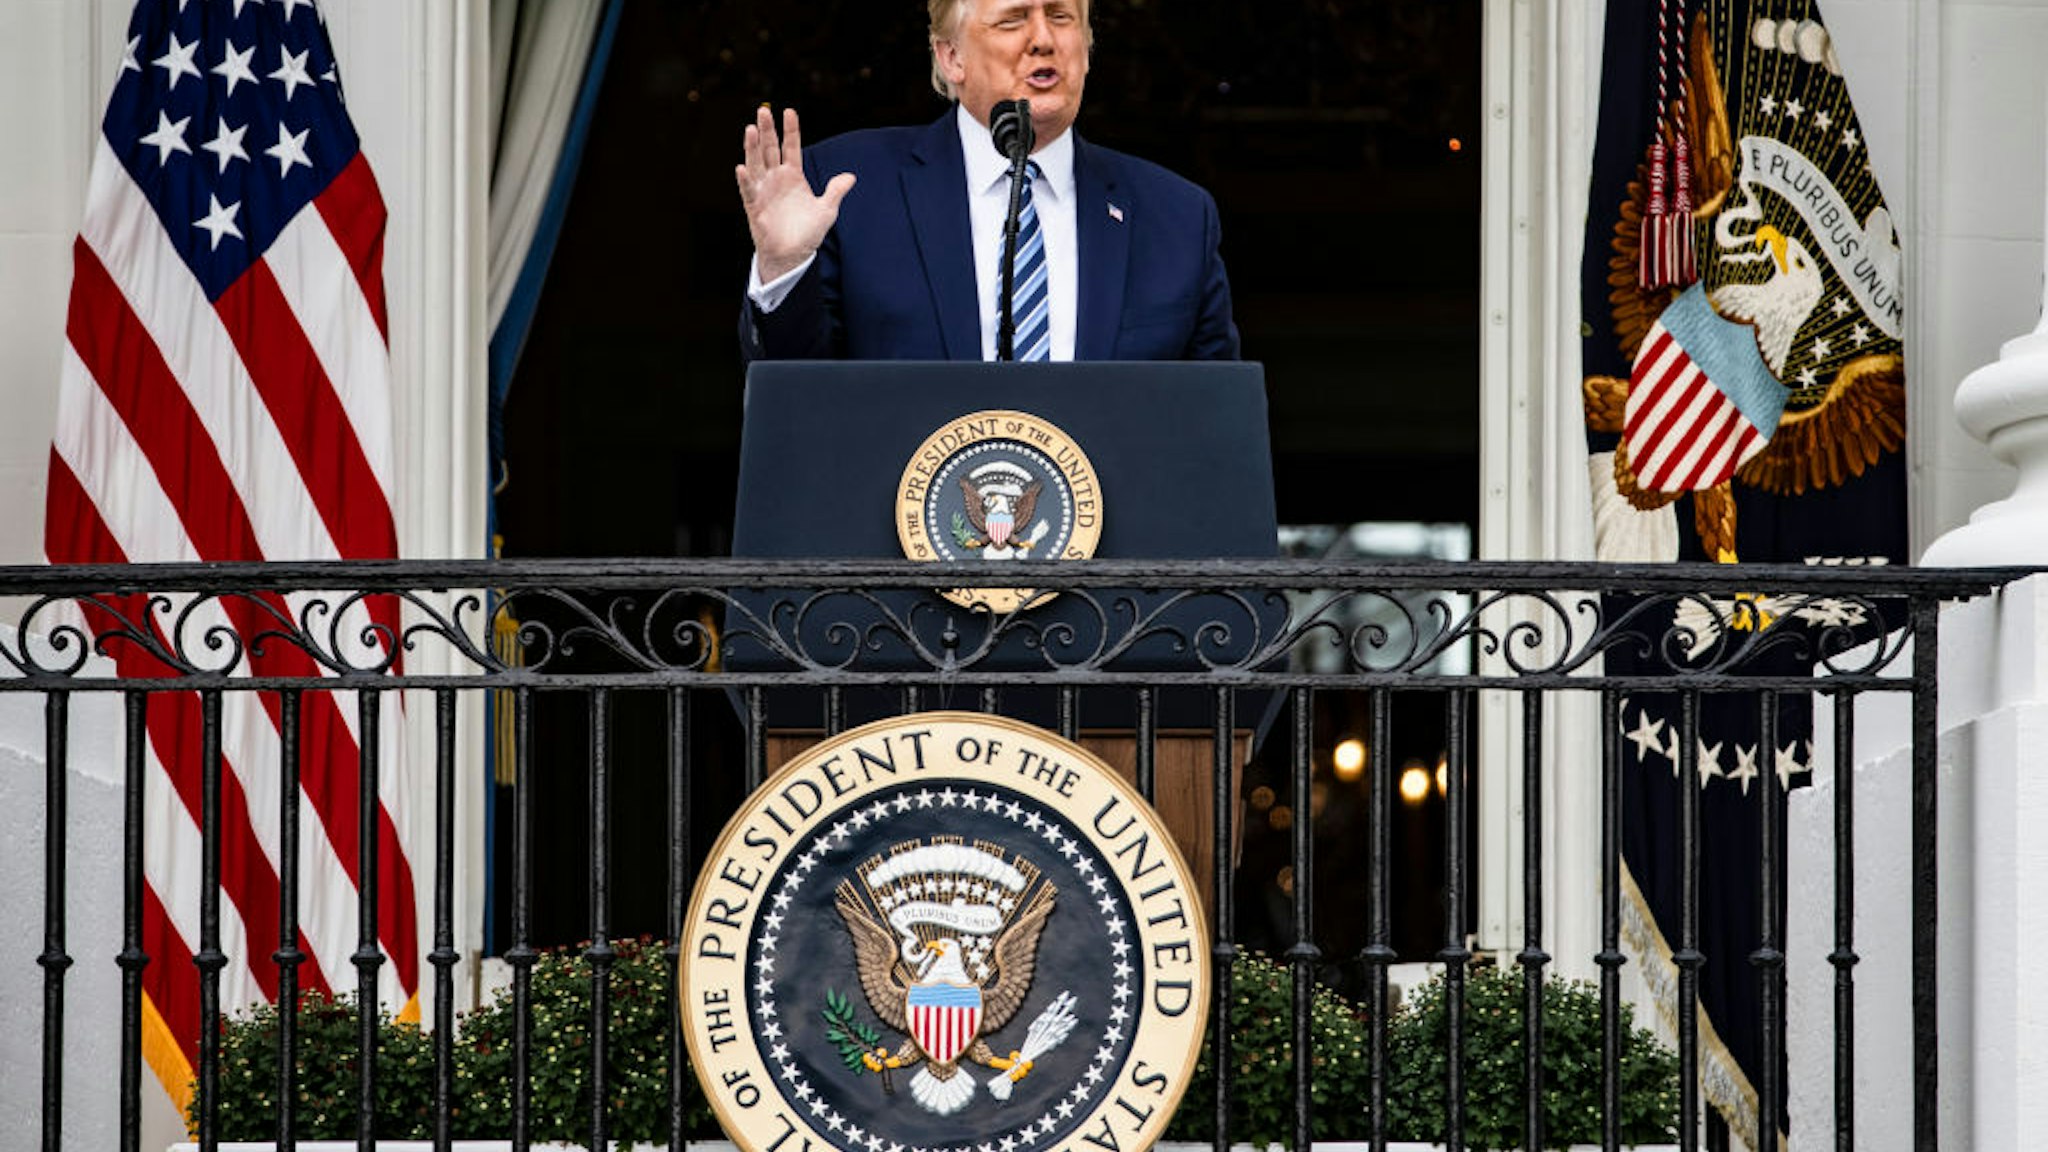 U.S. President Donald Trump addresses a rally in support of law and order on the South Lawn of the White House on October 10, 2020 in Washington, DC.